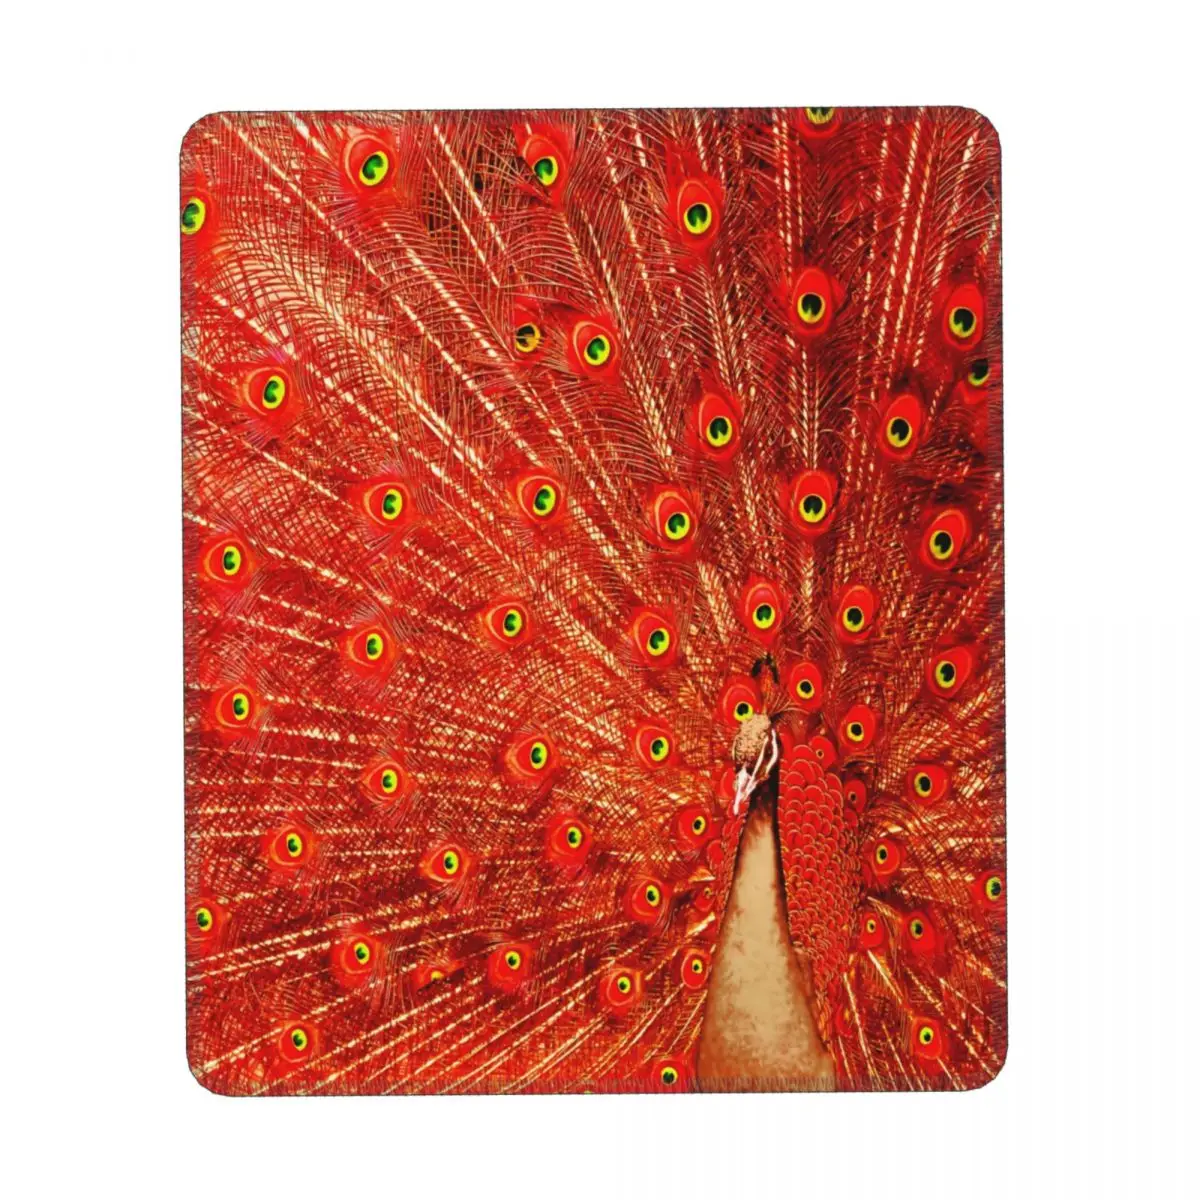 

Red Peacock Feathers Vertical Print Mouse Pad Cute Animal Desk Rubber Mousepad Rertro Anti Fatigue Cute Mouse Pads